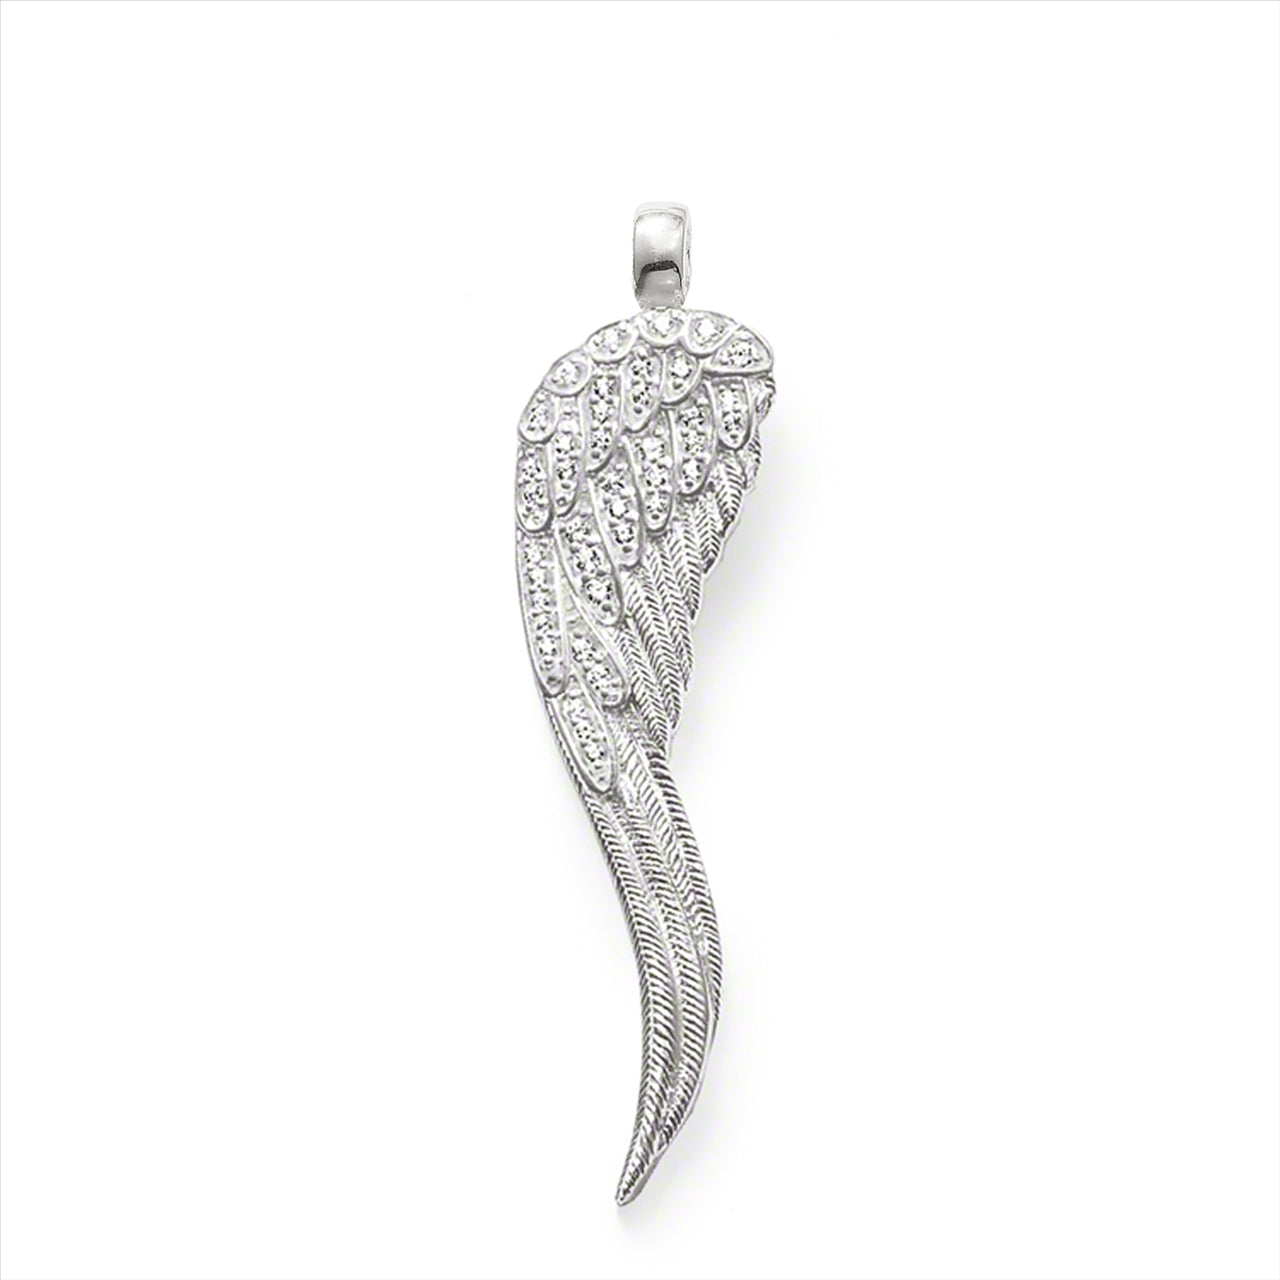 Thomas Sabo "Iconic Collection" Sterling Silver White Cubic Zirconia Angel Wing Pendant